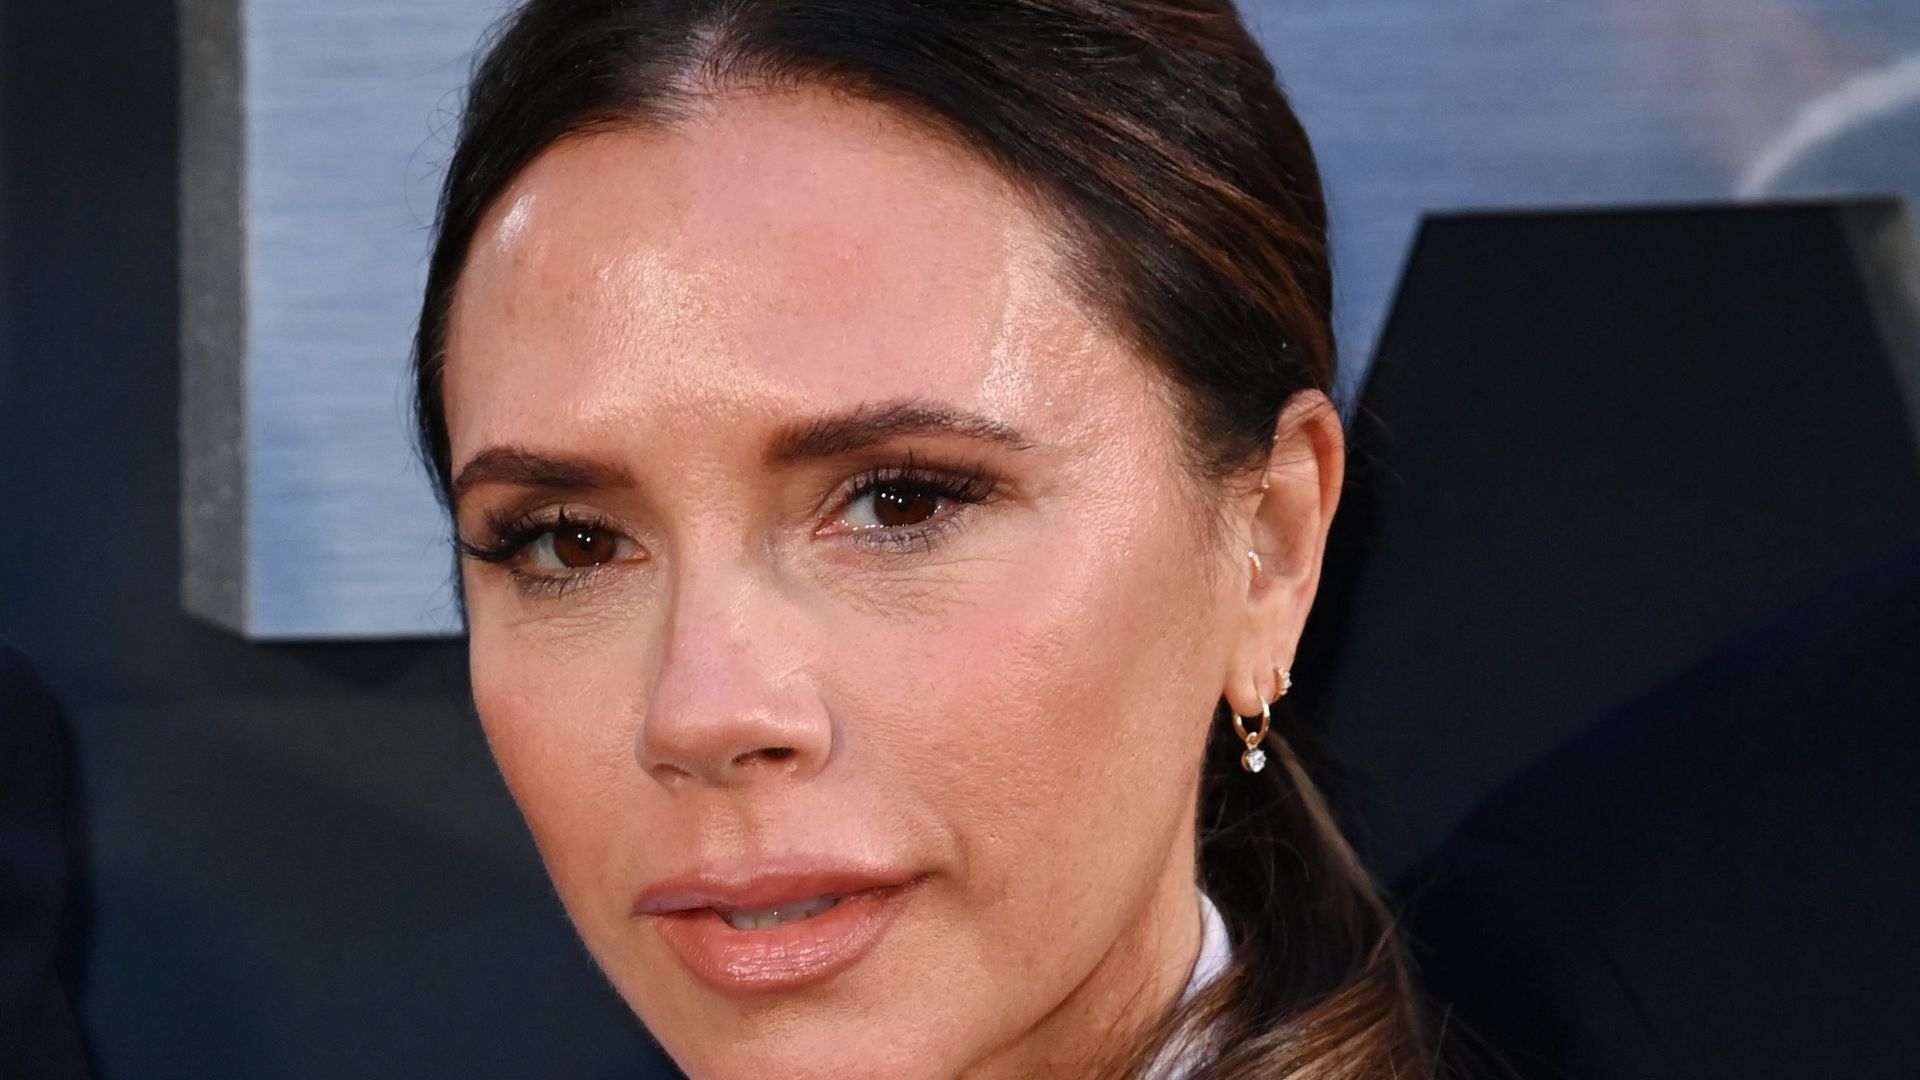 Victoria Beckham's rarely-seen sister shares incredible photo alongside Spice Girl - and they could be twins